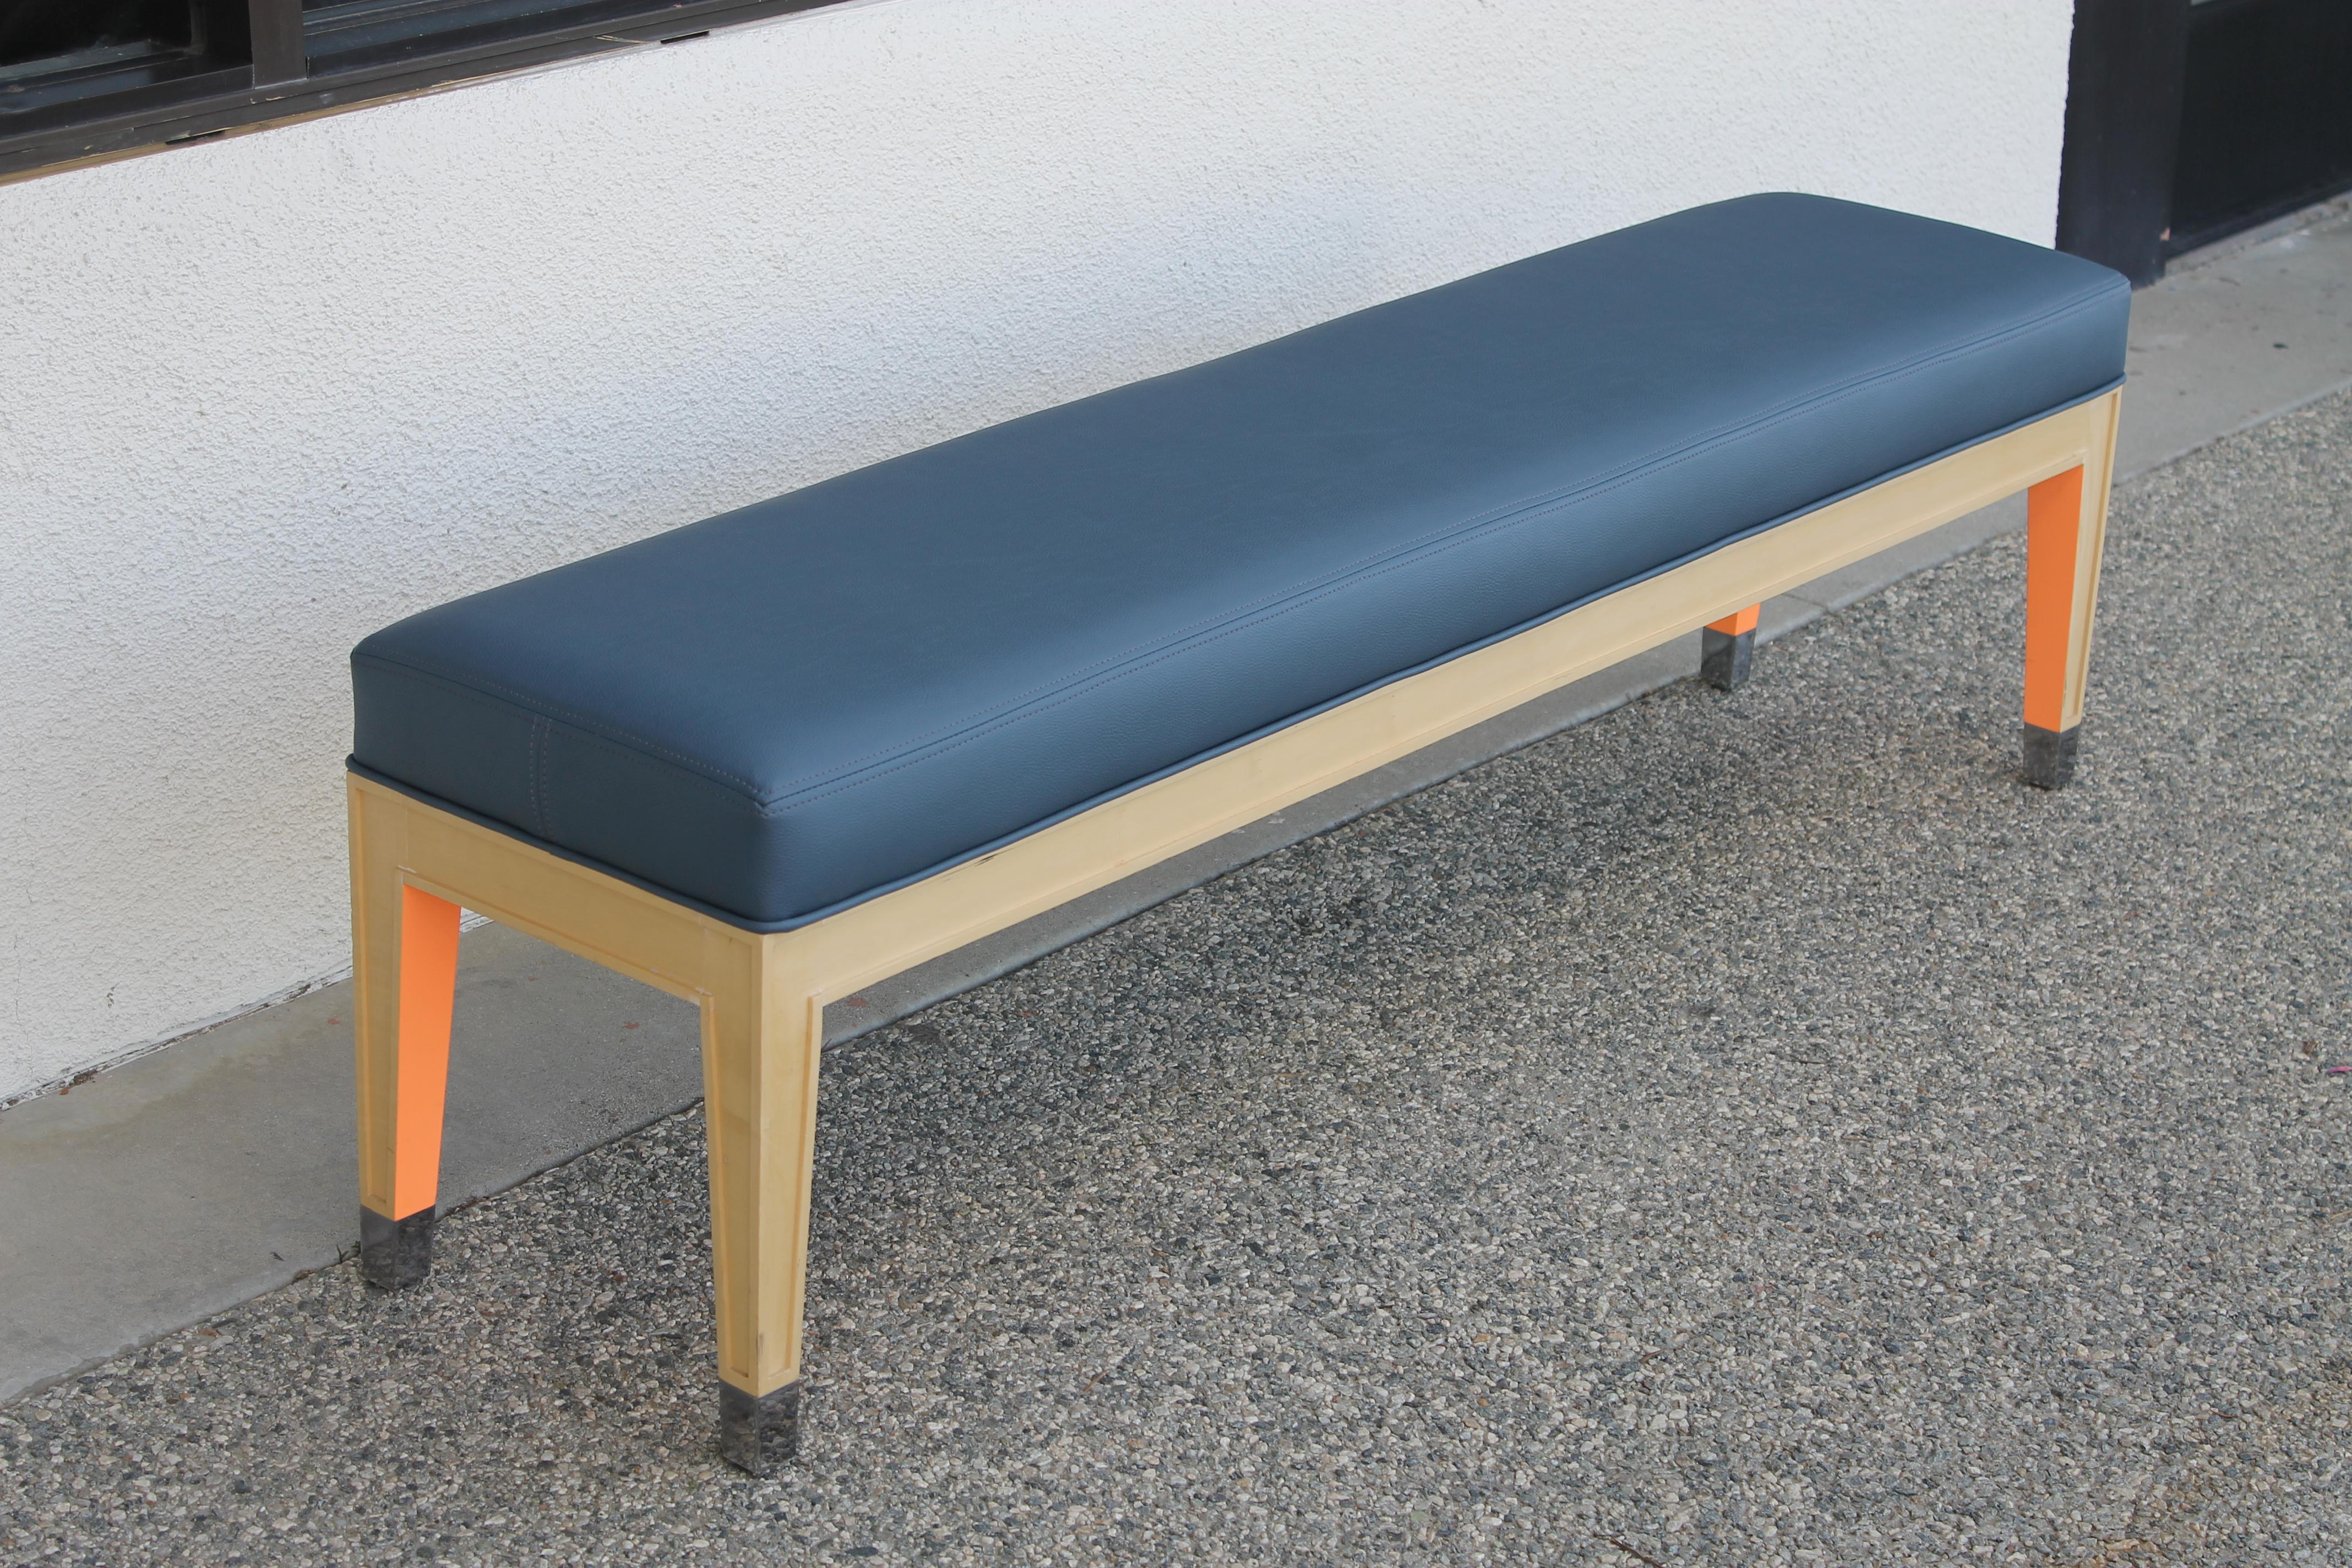 Bench designed by Philippe Starck for the Clift Royal Sonesta Hotel, San Francisco, CA., circa 2000. Bench has been professionally reupholstered in blue recycled leather. Bench measures 60